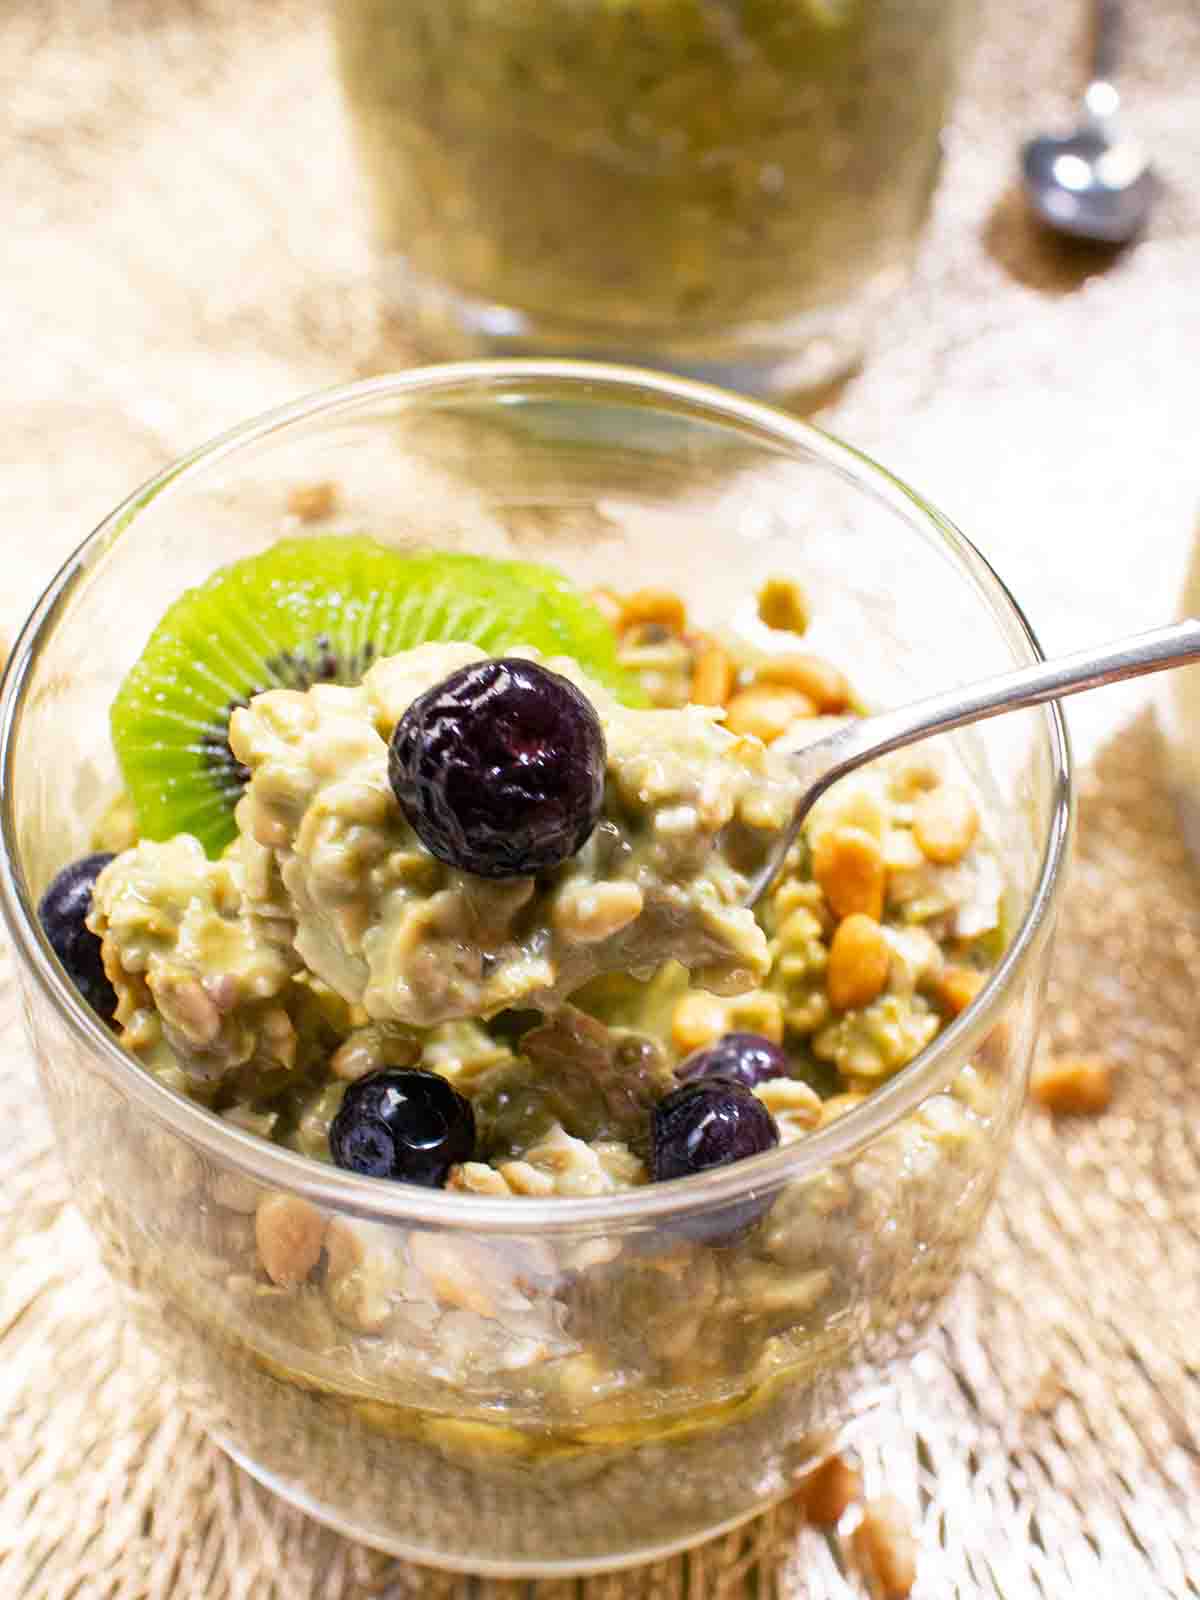 scoop out matcha overnight oats from the cup